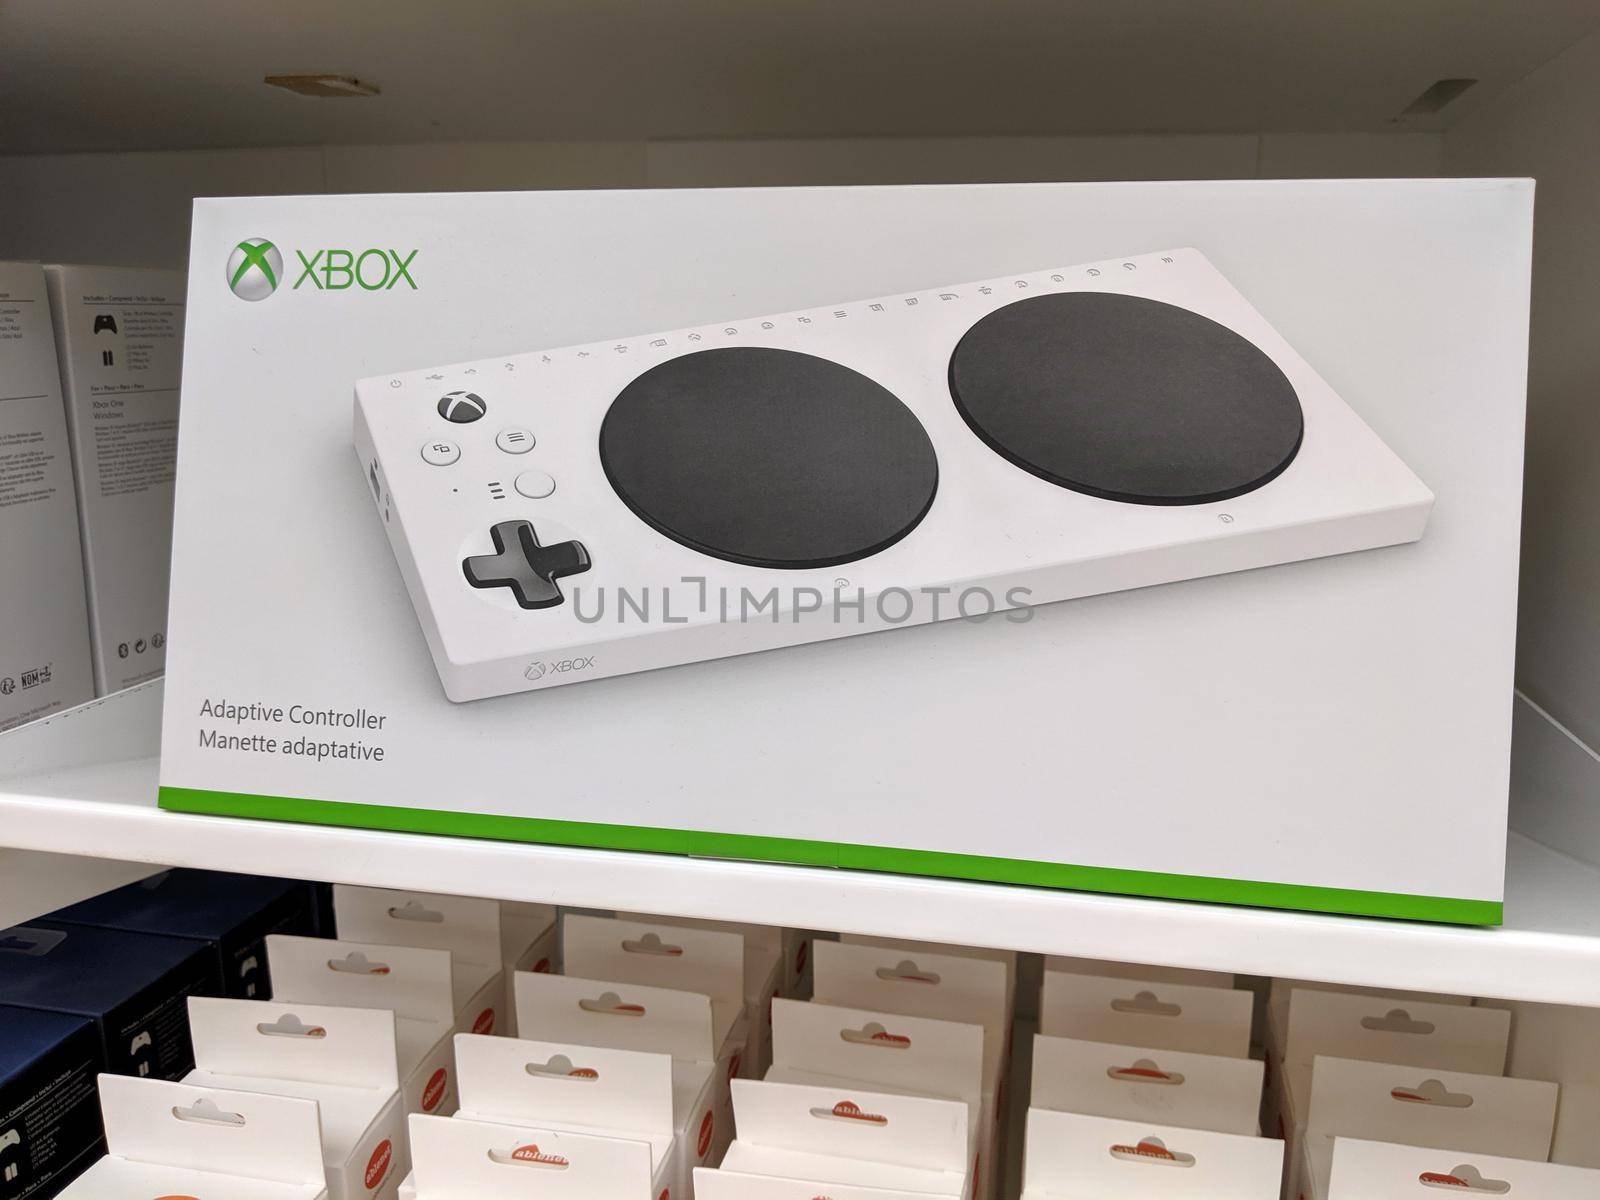  Xbox Adaptive Controller for sale inside Microsoft store by EricGBVD